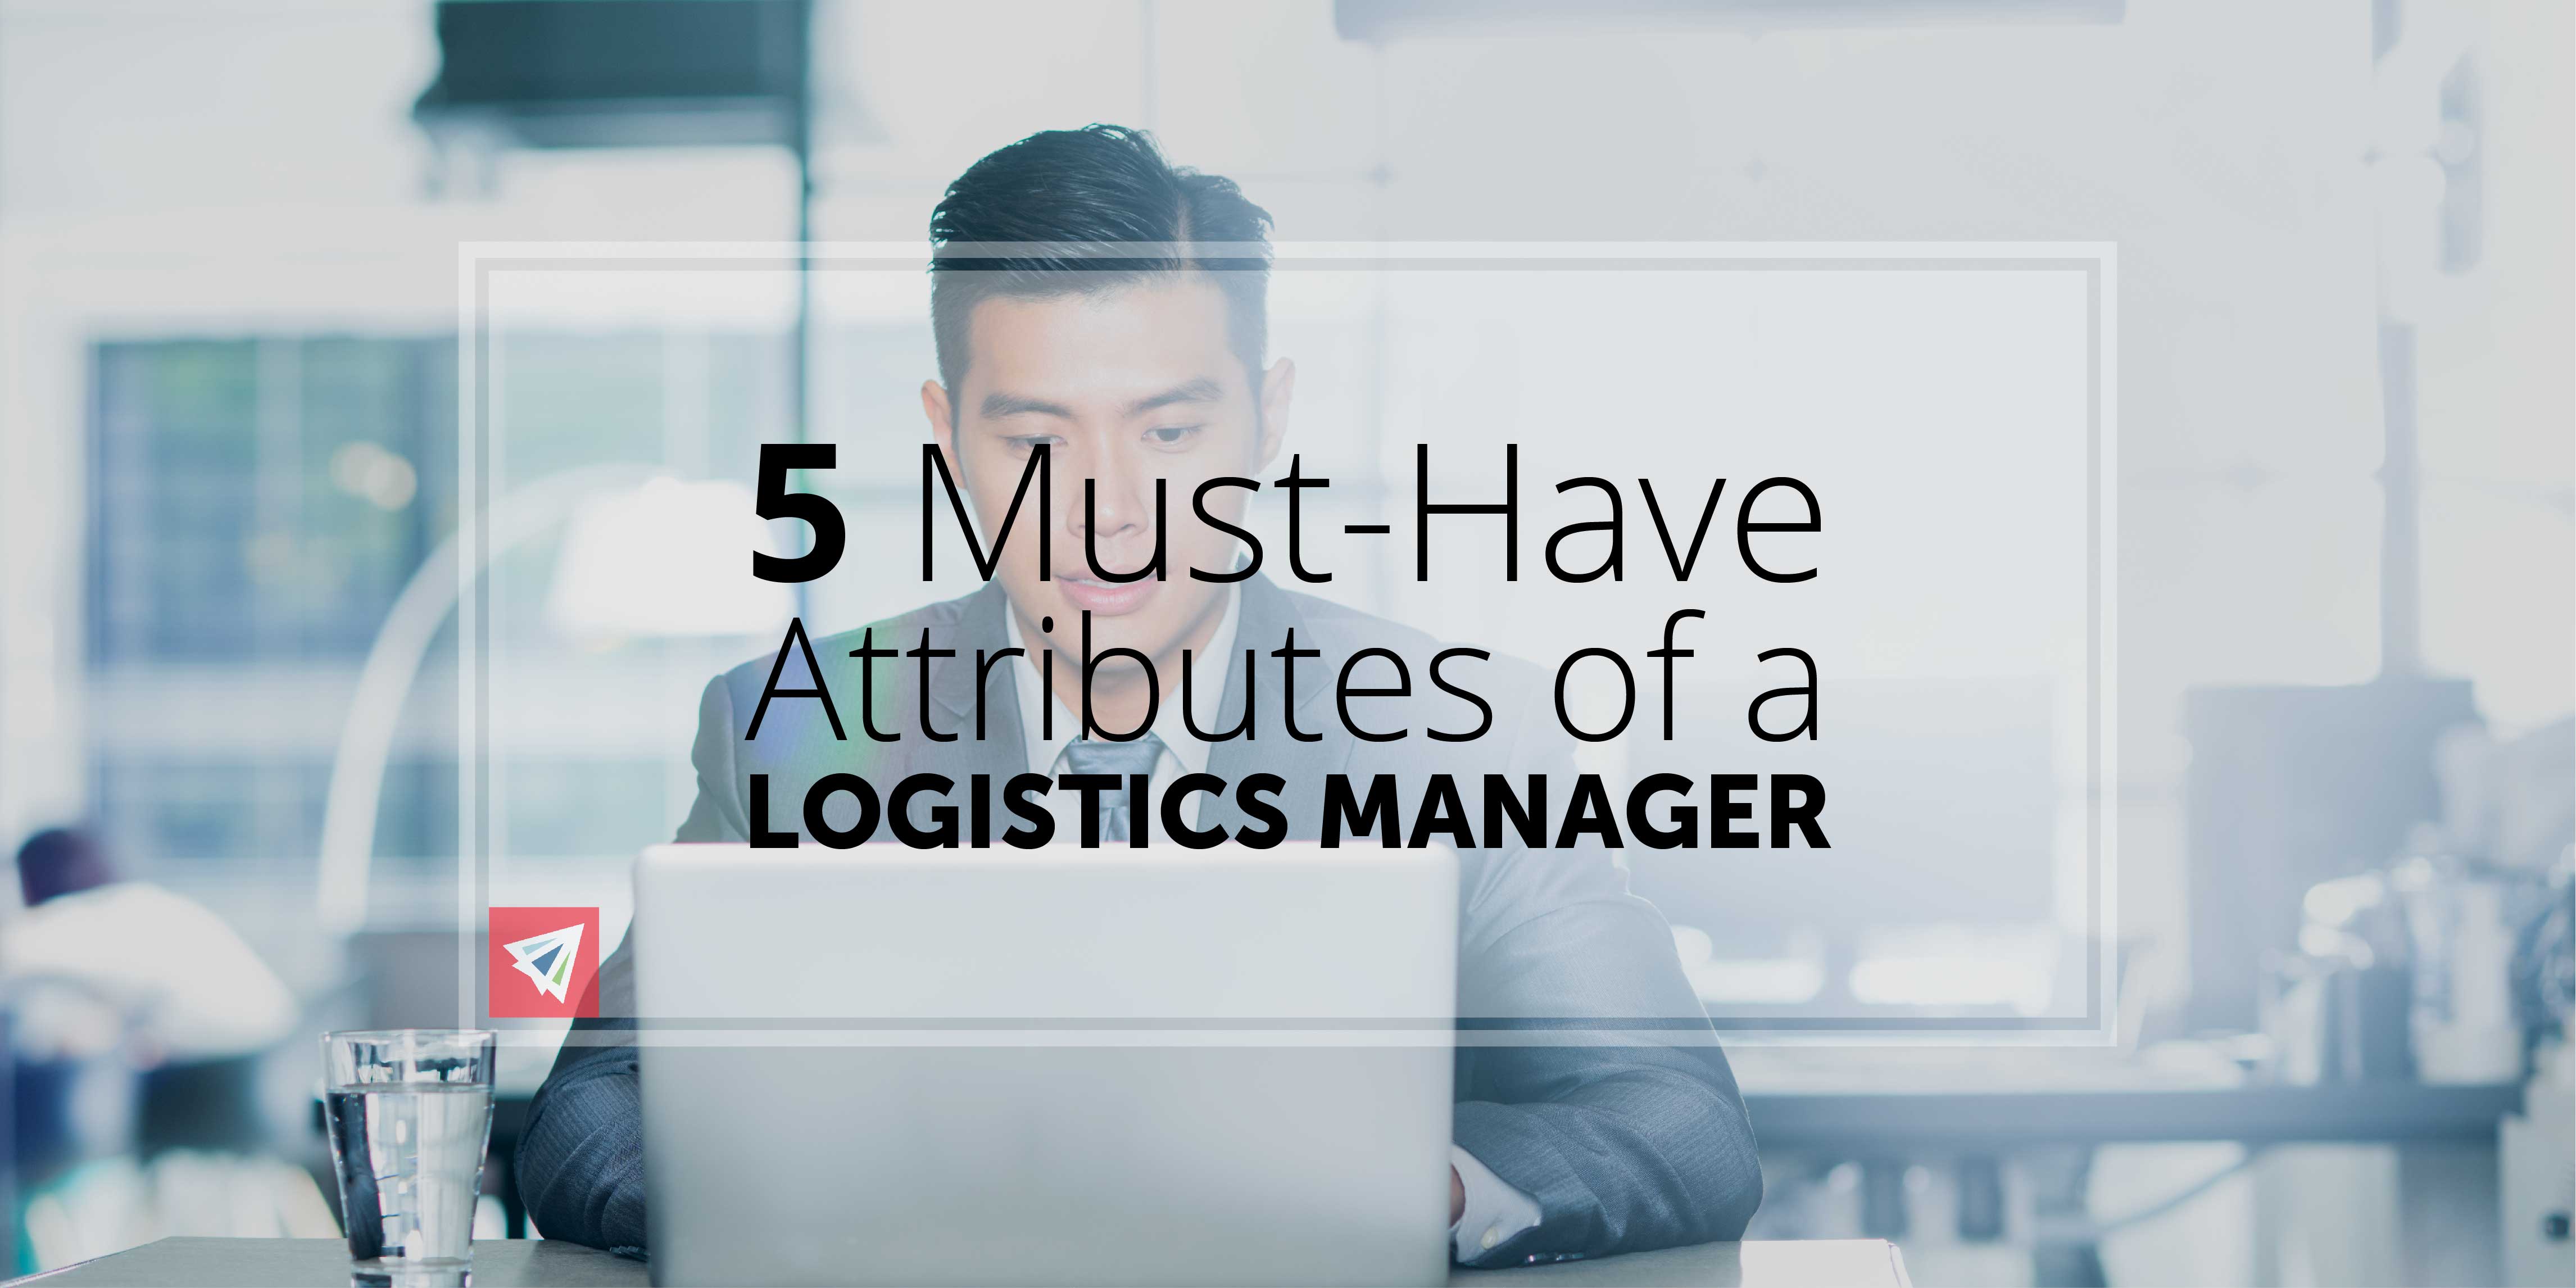 5 Must-Have Attributes of a Logistics Manager